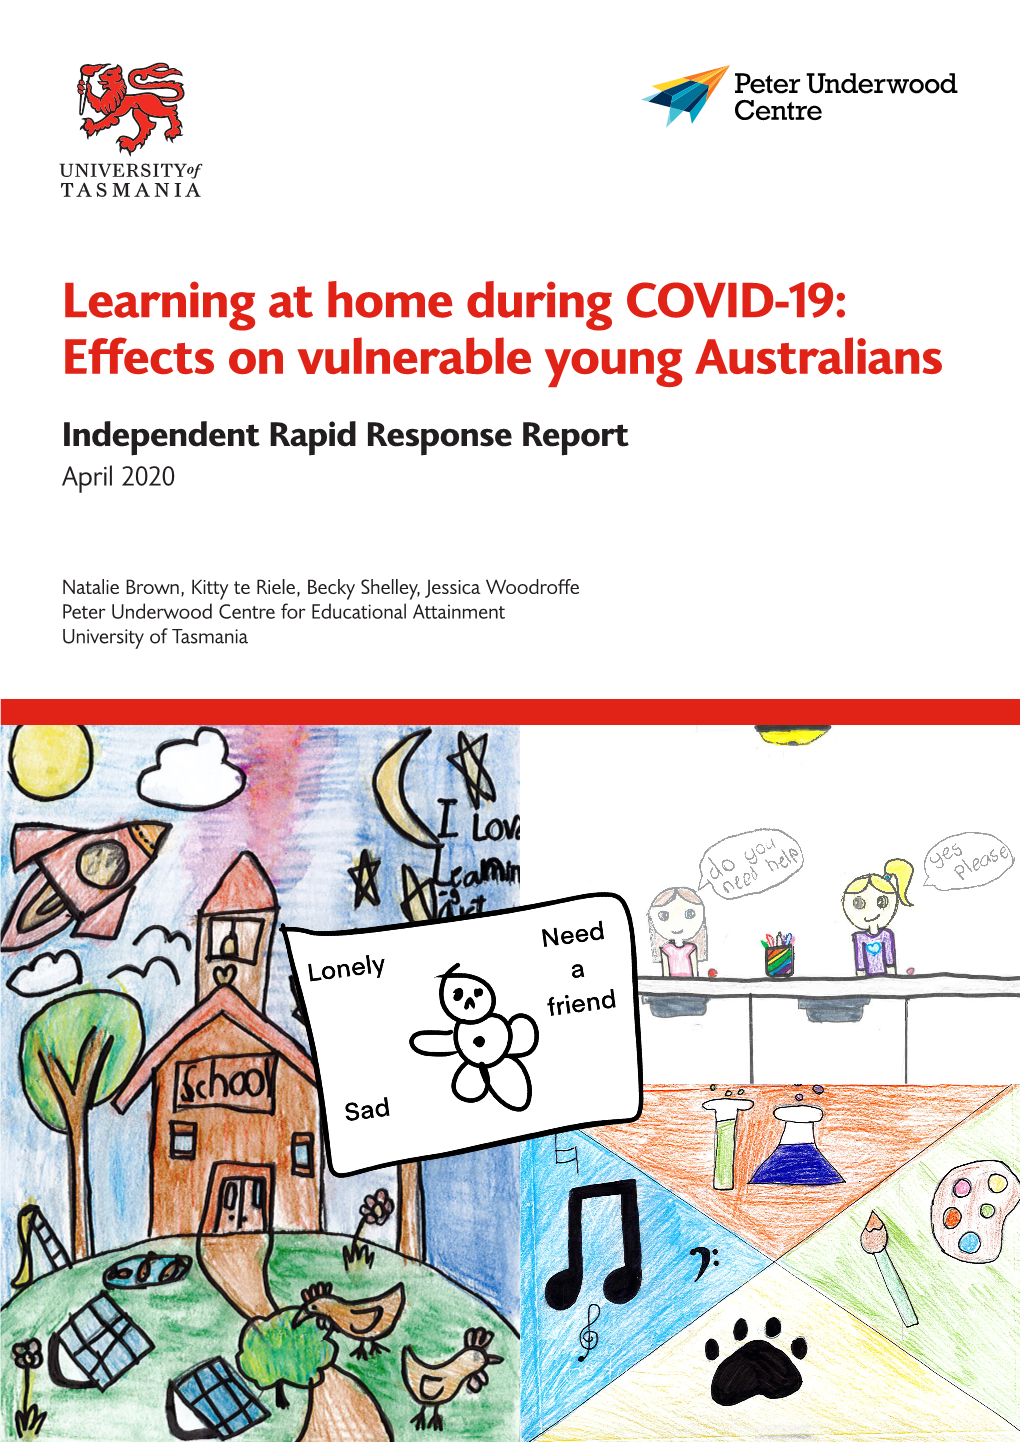 Learning at Home During COVID-19: Effects on Vulnerable Young Australians Independent Rapid Response Report April 2020